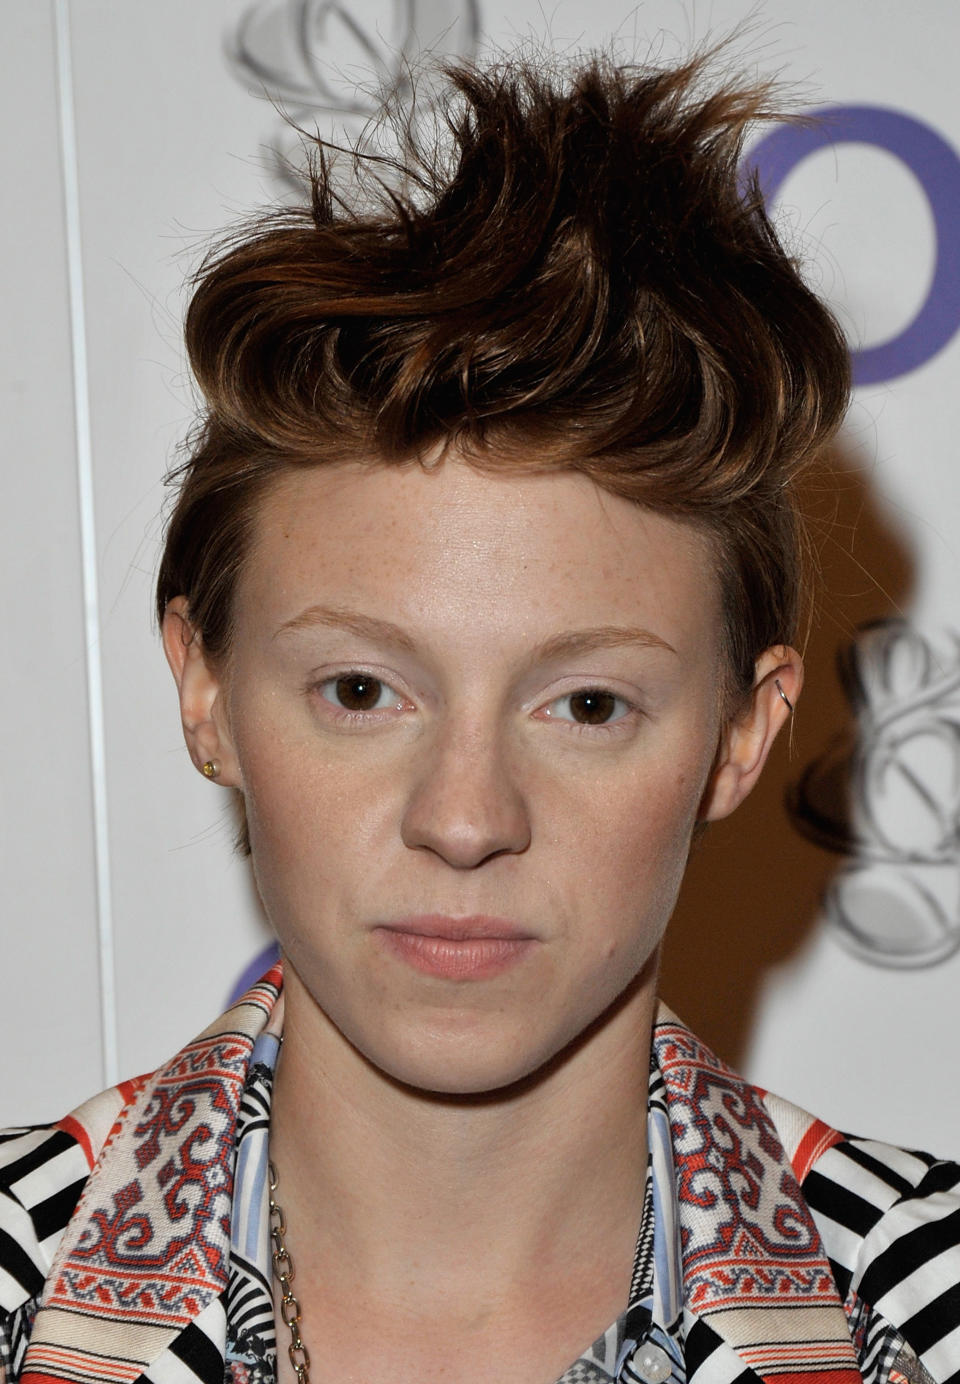 LONDON, ENGLAND - JULY 03:  Singer La Roux attends the O2 Silver Clef Awards 2009 at the London Hilton on July 3, 2009 in London, England.  (Photo by Jon Furniss/WireImage)  *** Local Caption ***